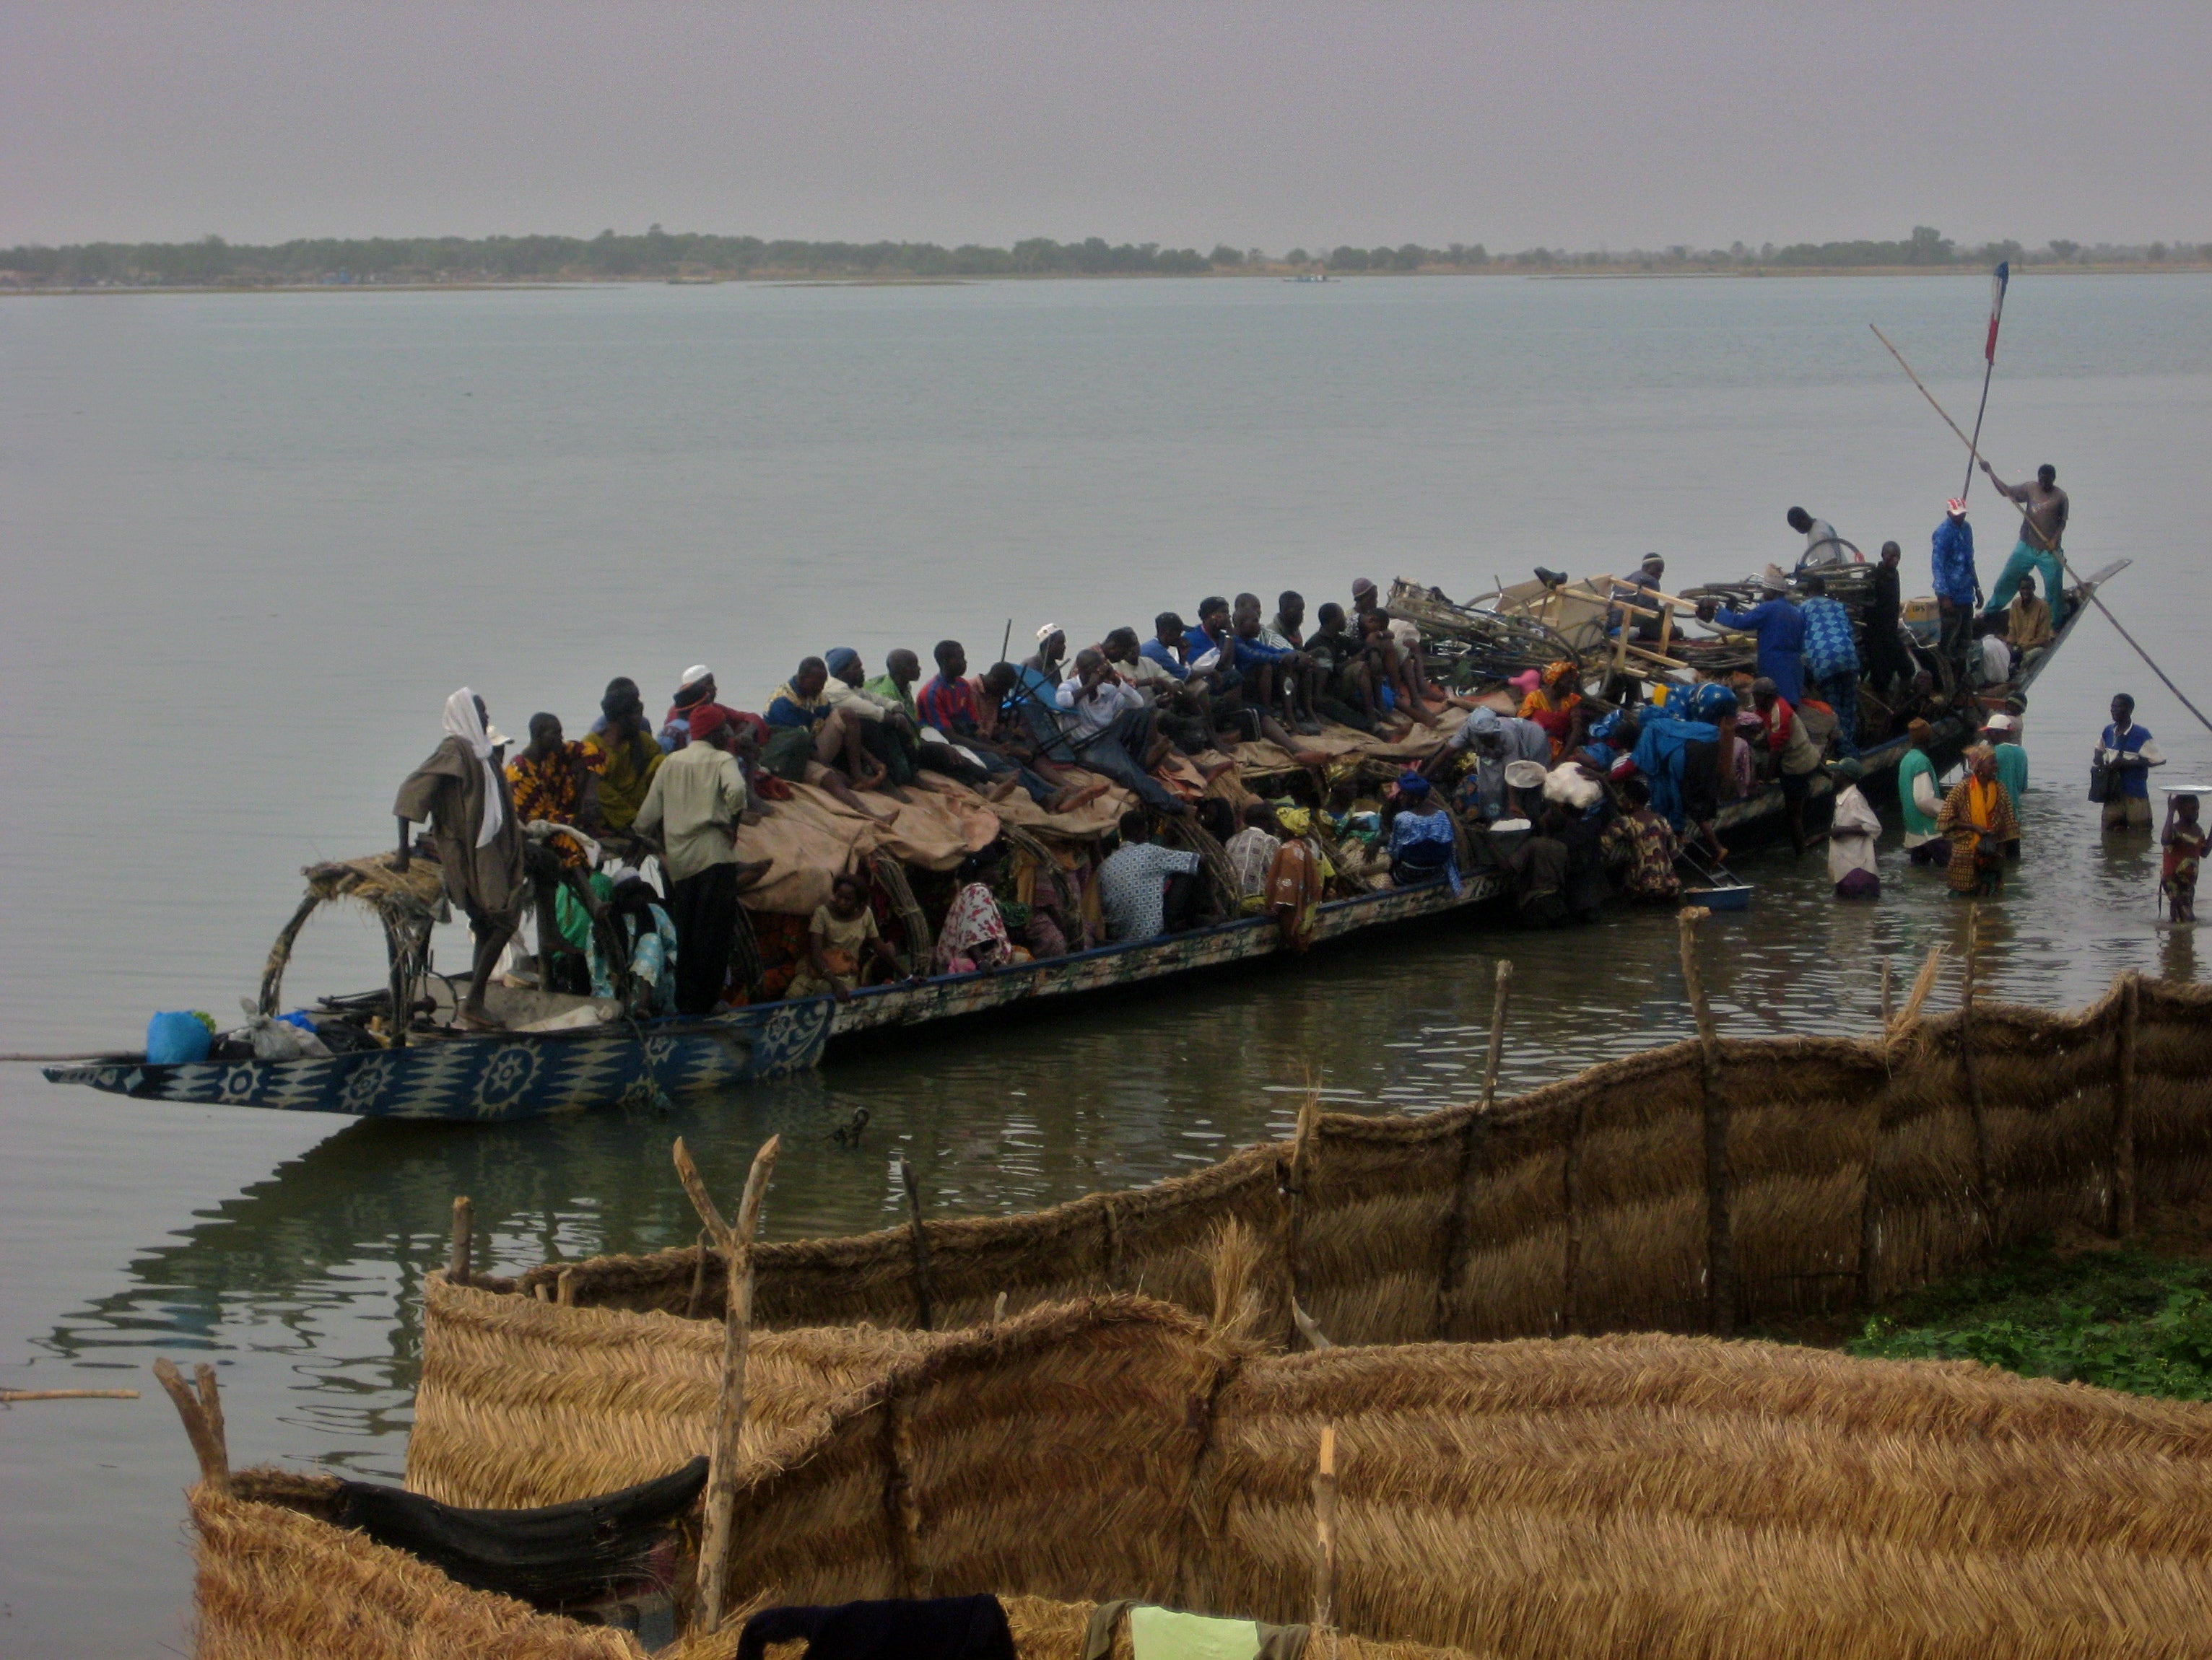 Dozens Feared Dead After Boat With 200 Passengers Sinks In Nigeria The Independent 2350